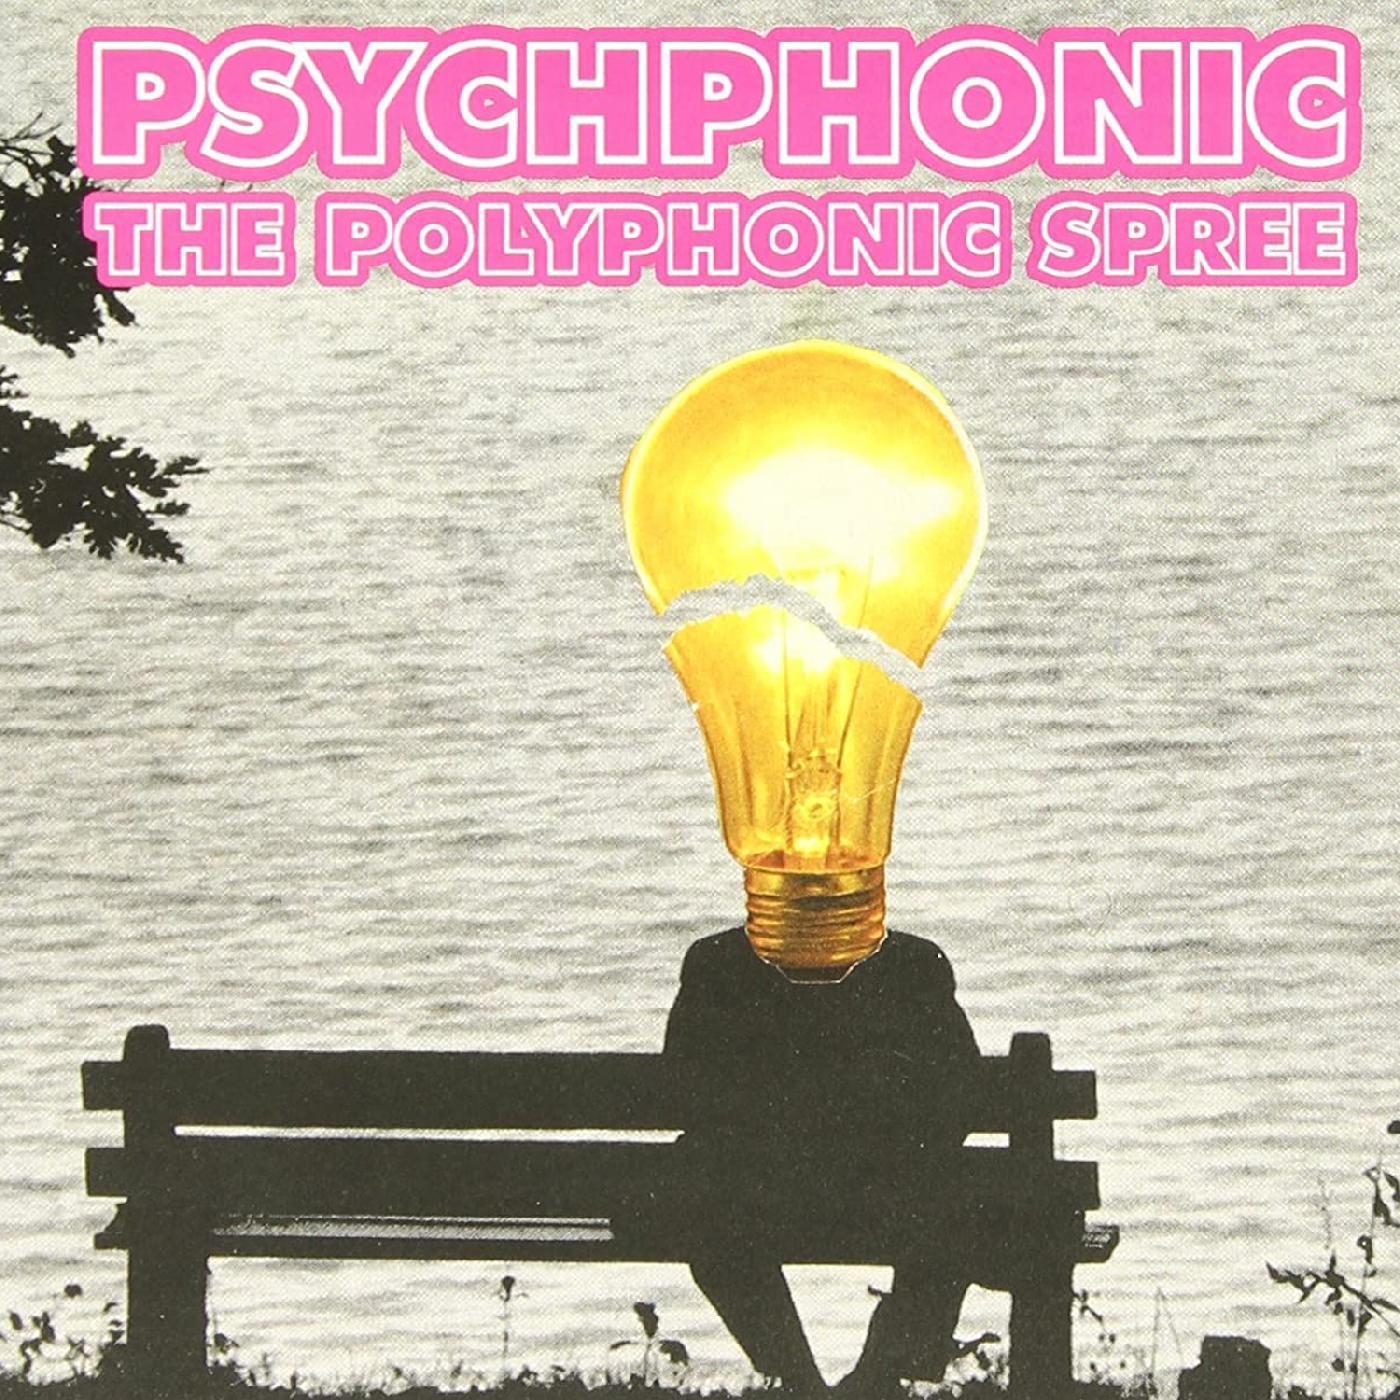 The Polyphonic Spree - You Don't Know Me (Set in Sand Remix)